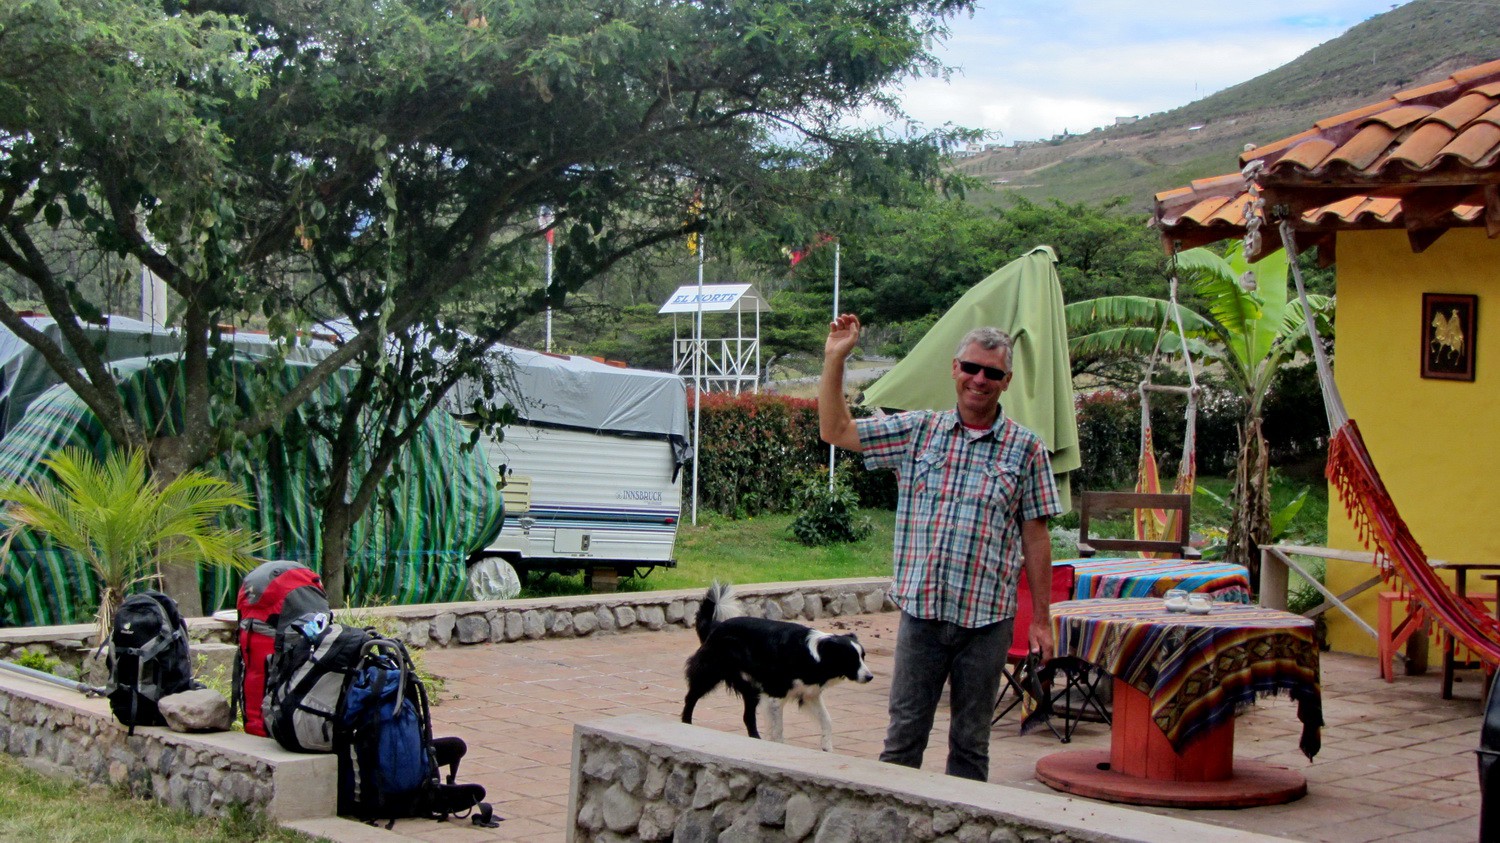 Bye bye to Finca Sommerwind on May 1st 2014 (with our car on the left)